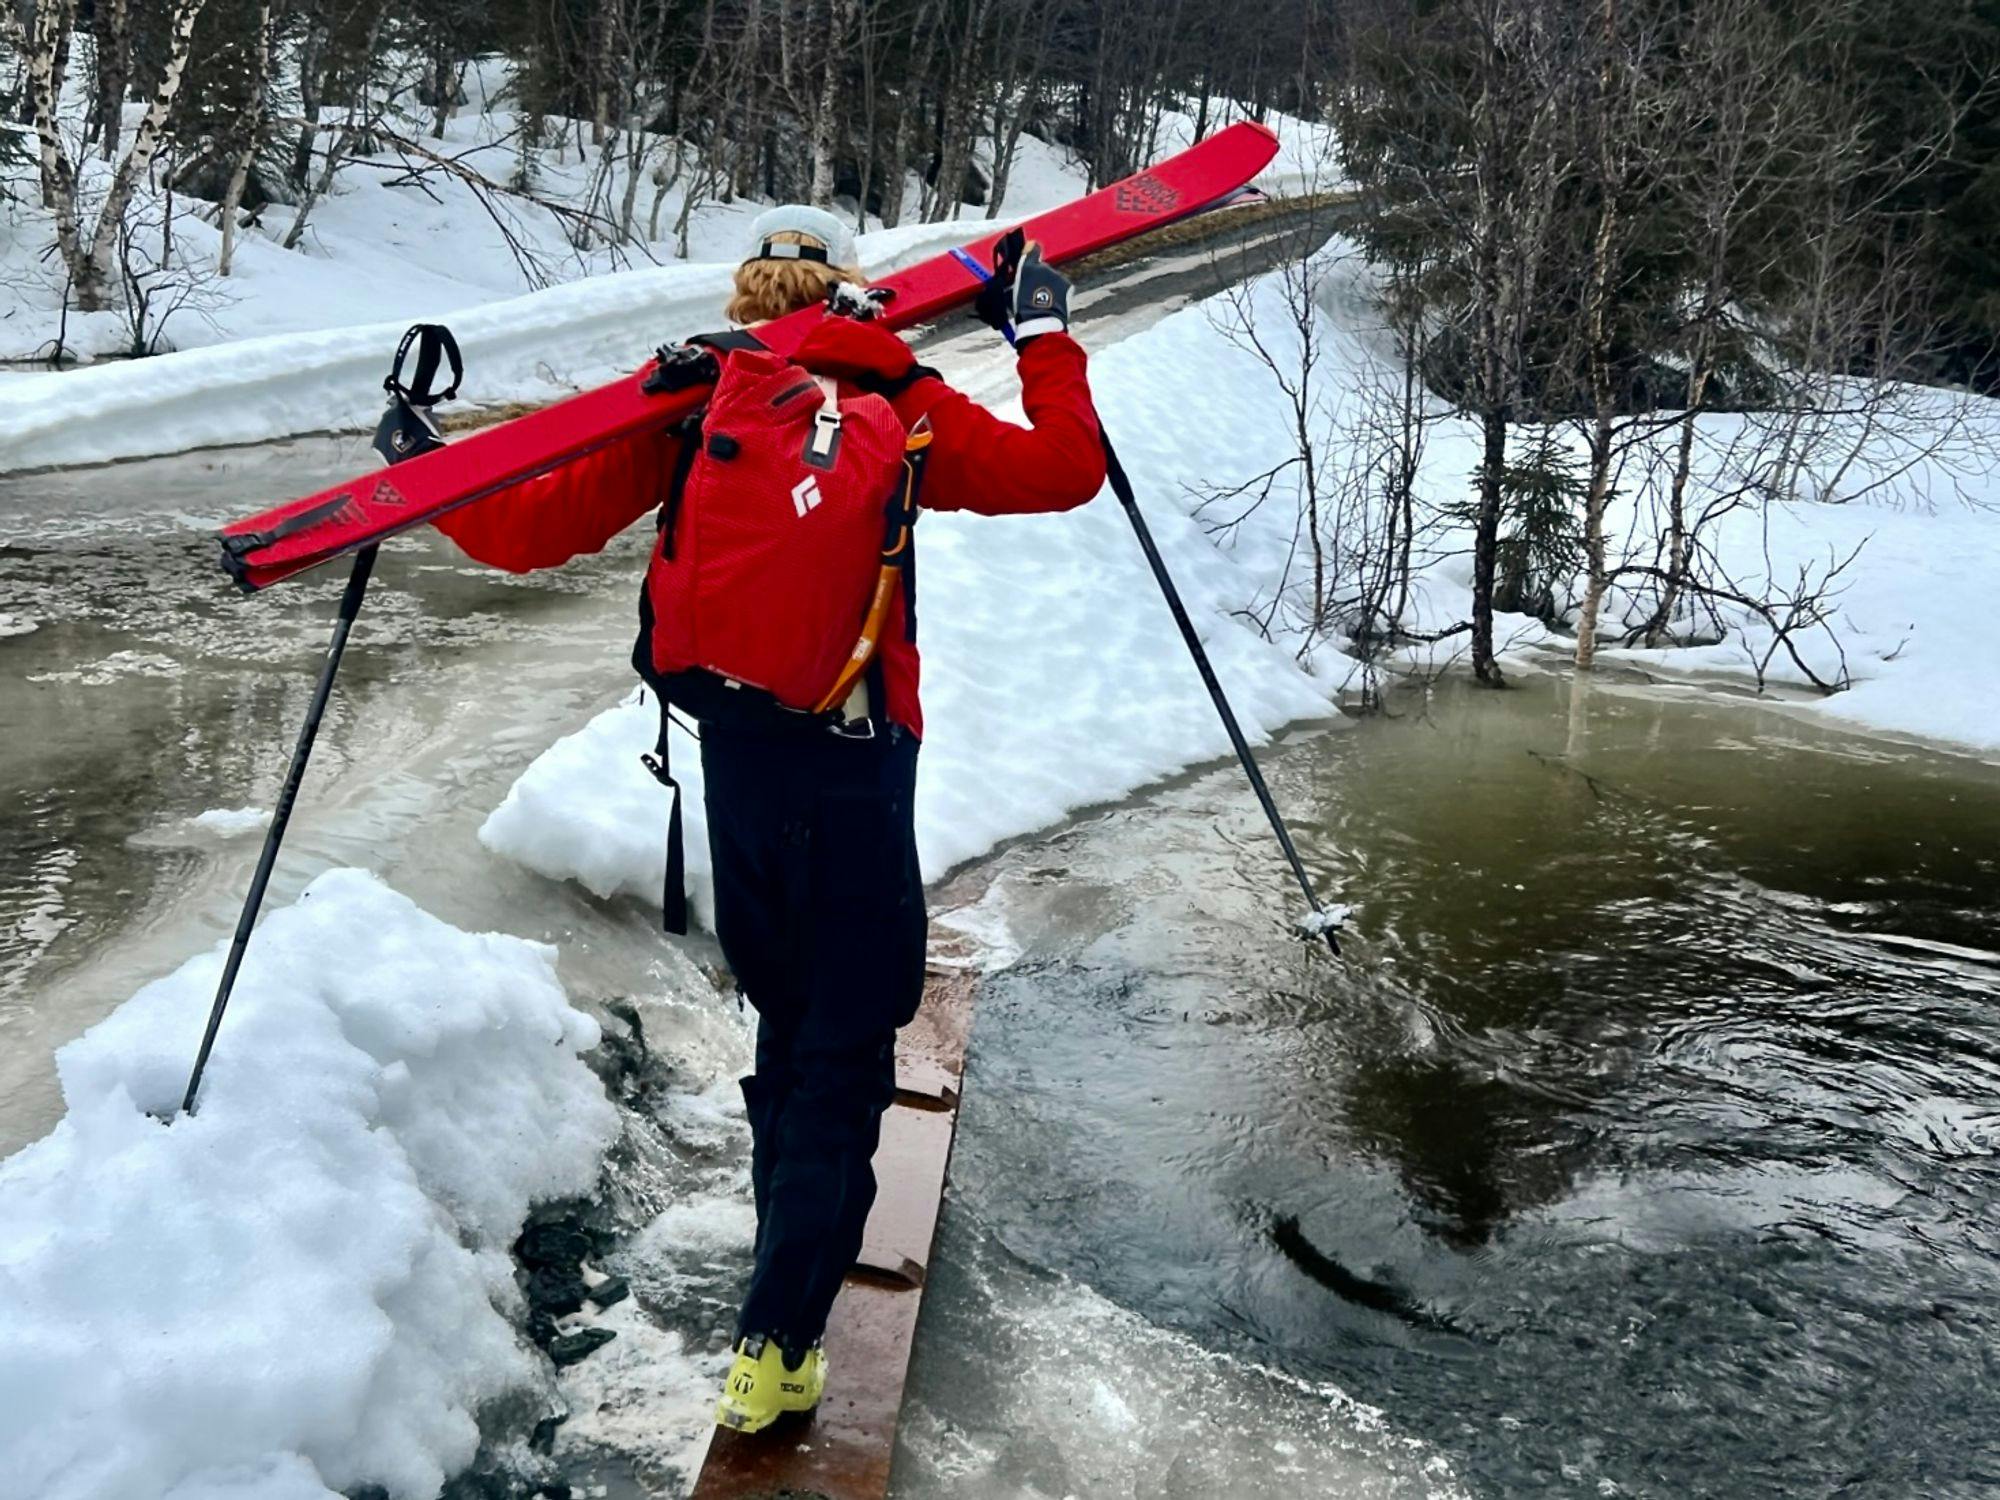 A skier crossing a plank over a river